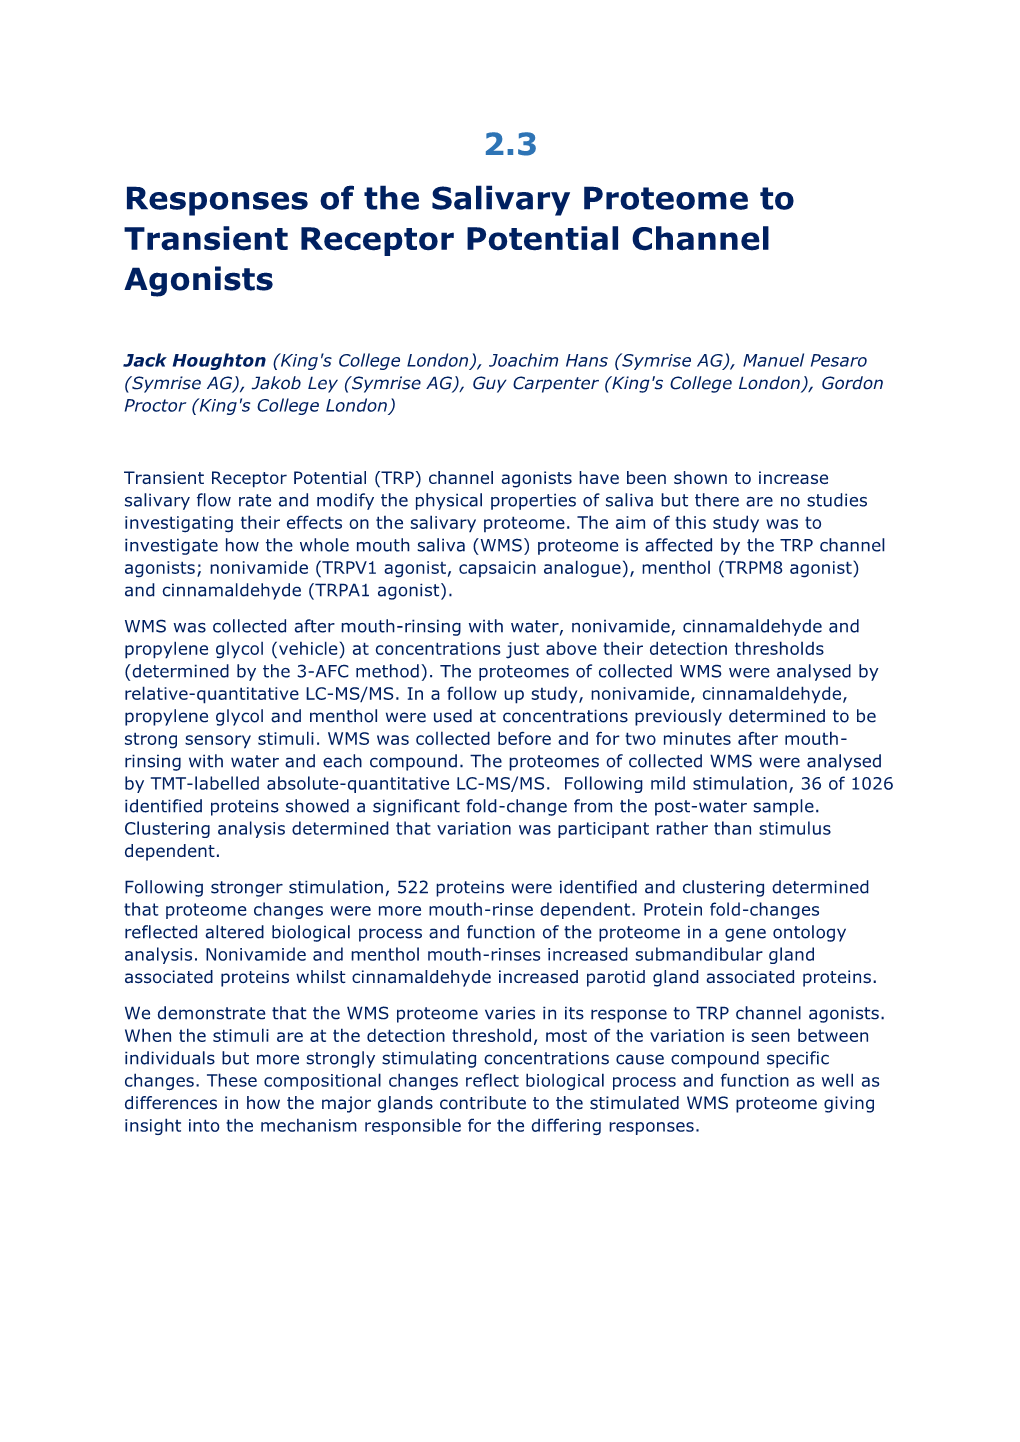 2.3 Responses of the Salivary Proteome to Transient Receptor Potential Channel Agonists